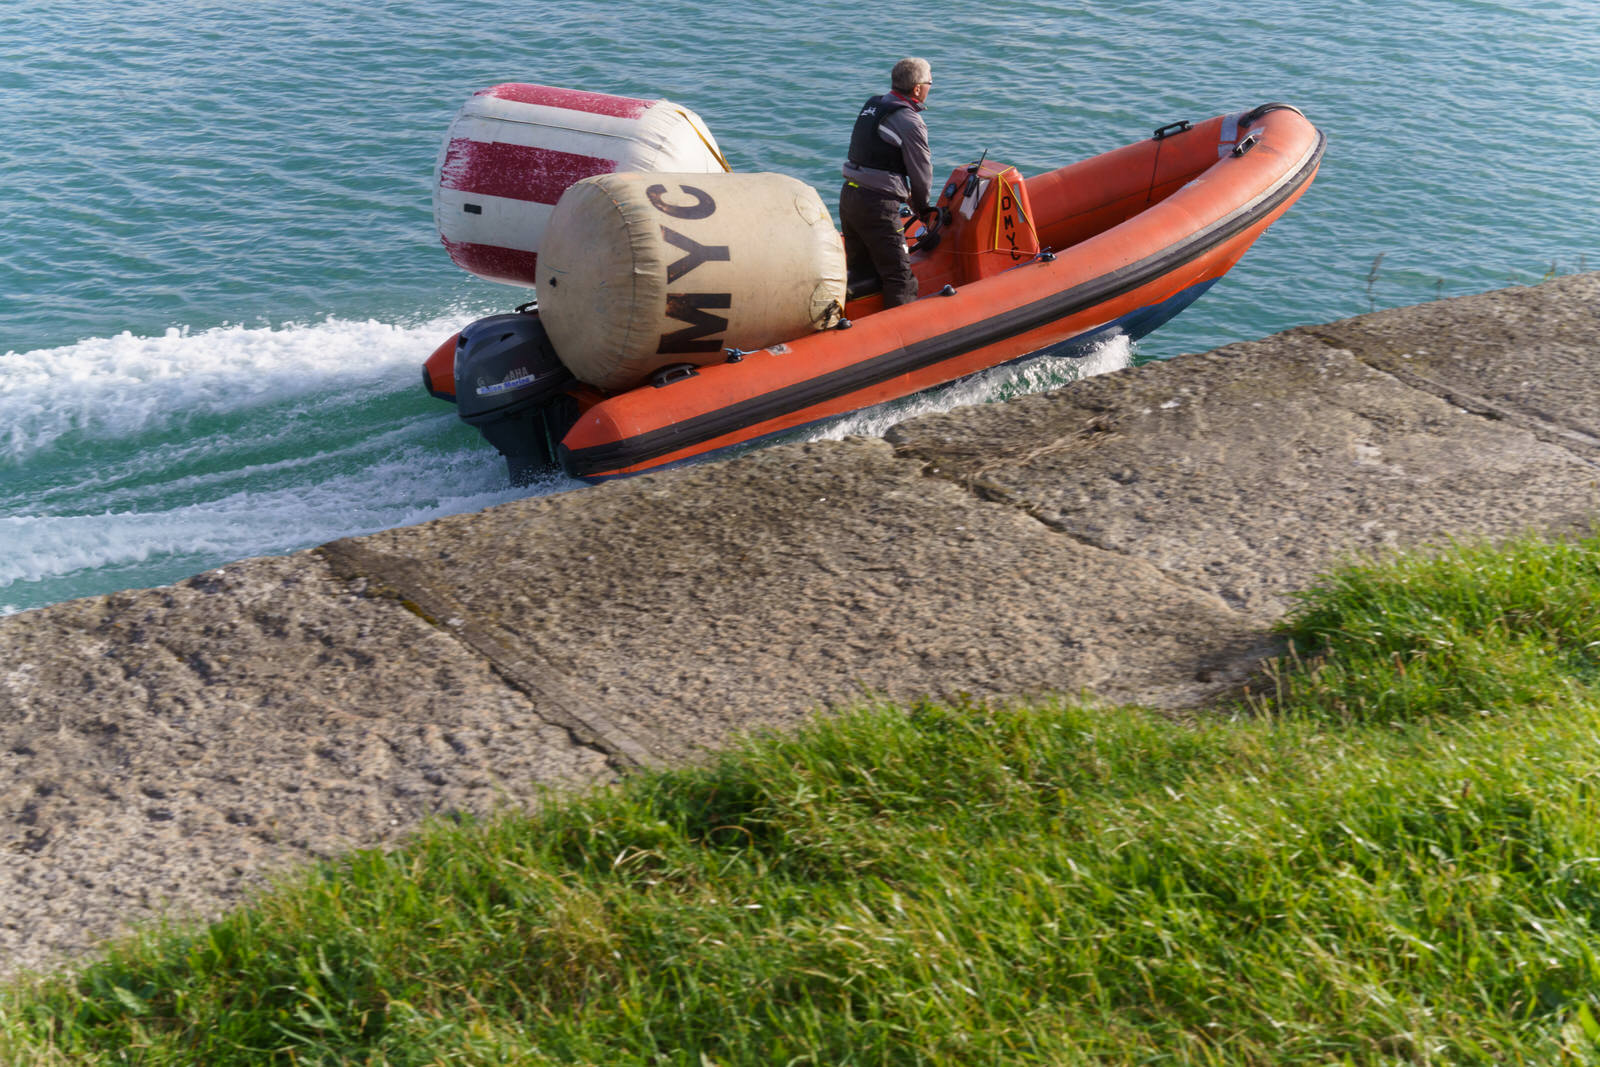 A MAN AND HIS TWO BUOYS IN A RIB [DUN LAOGHAIRE HARBOUR WEST PIER] 004